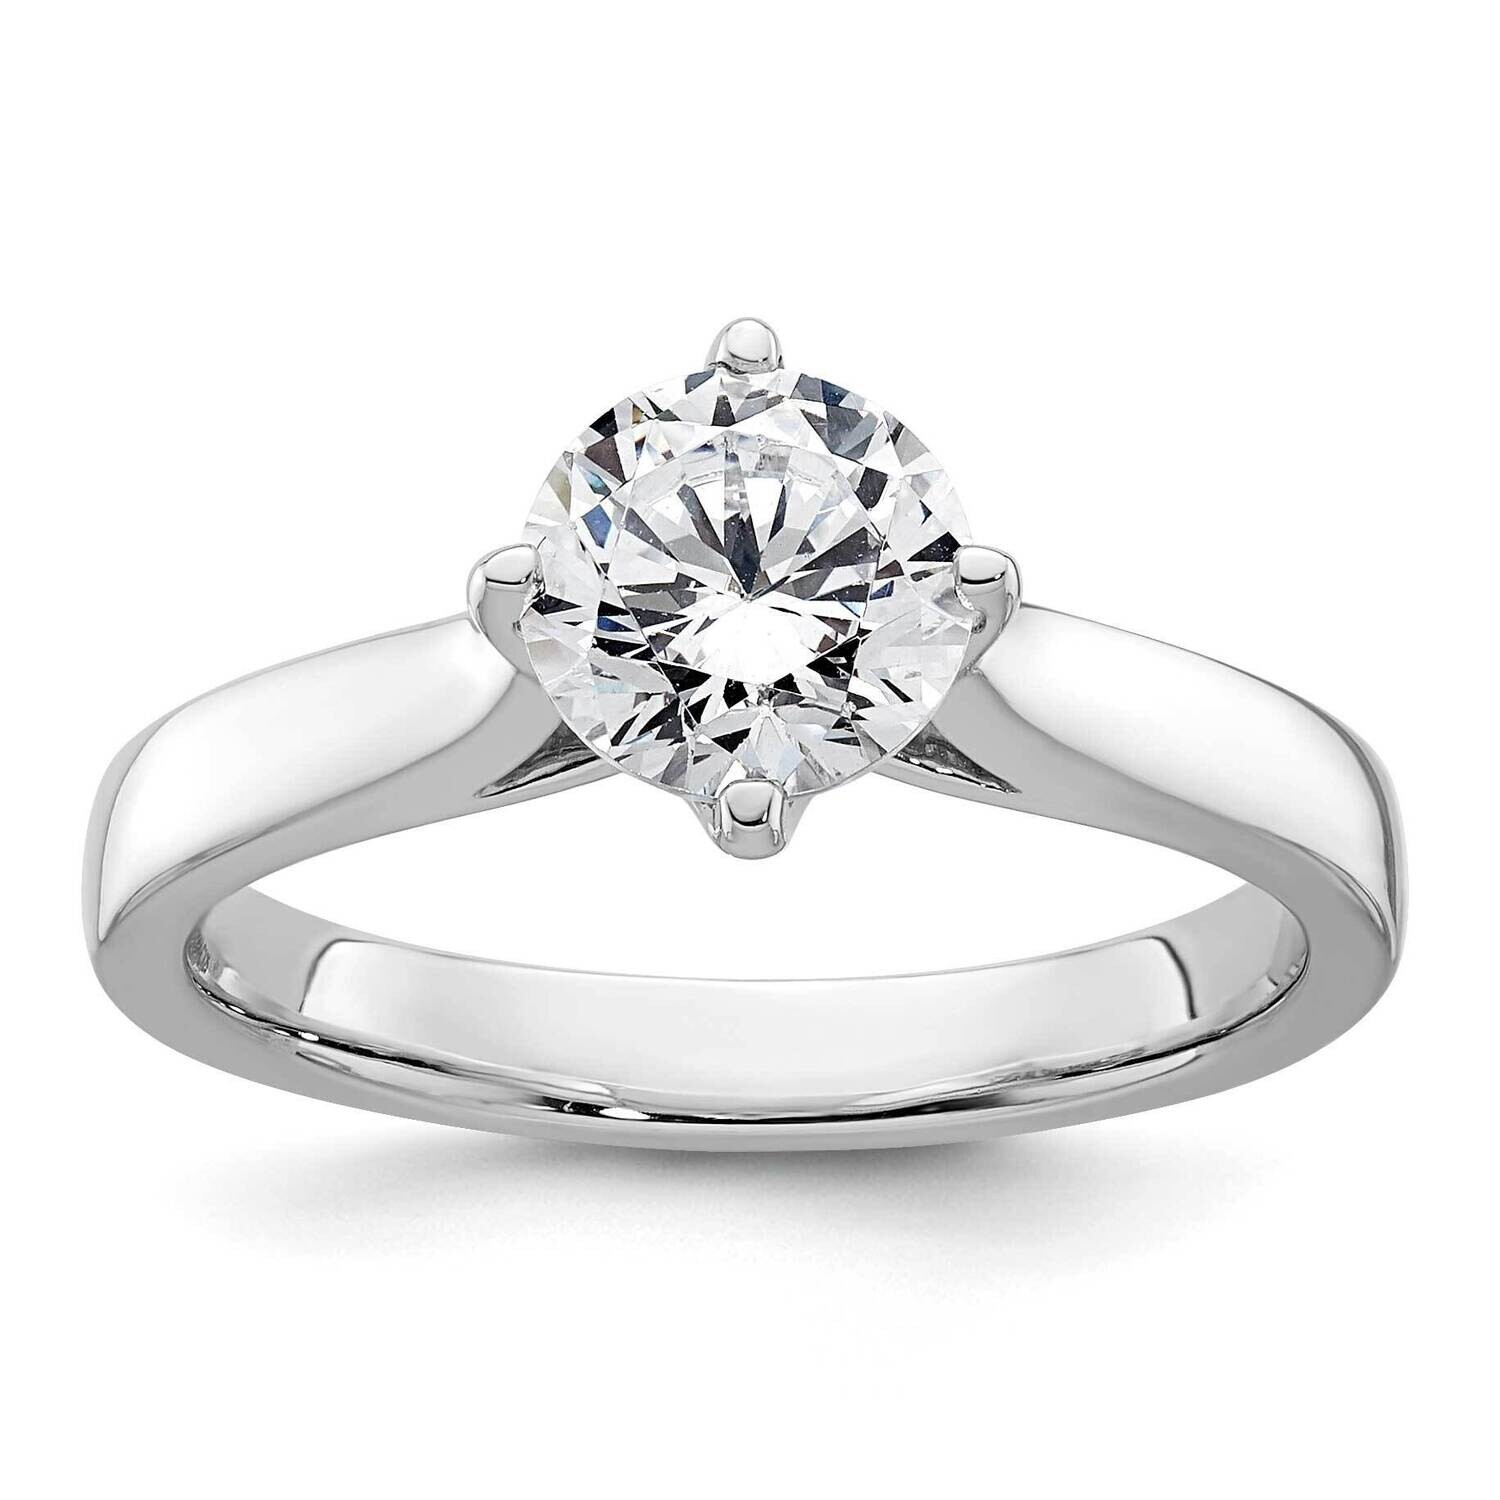 1.25 Carat 7.00 mm 4-Prong Round Solitaire Engagement Ring Mounting 14k White Gold RM1938E-125-CWAA